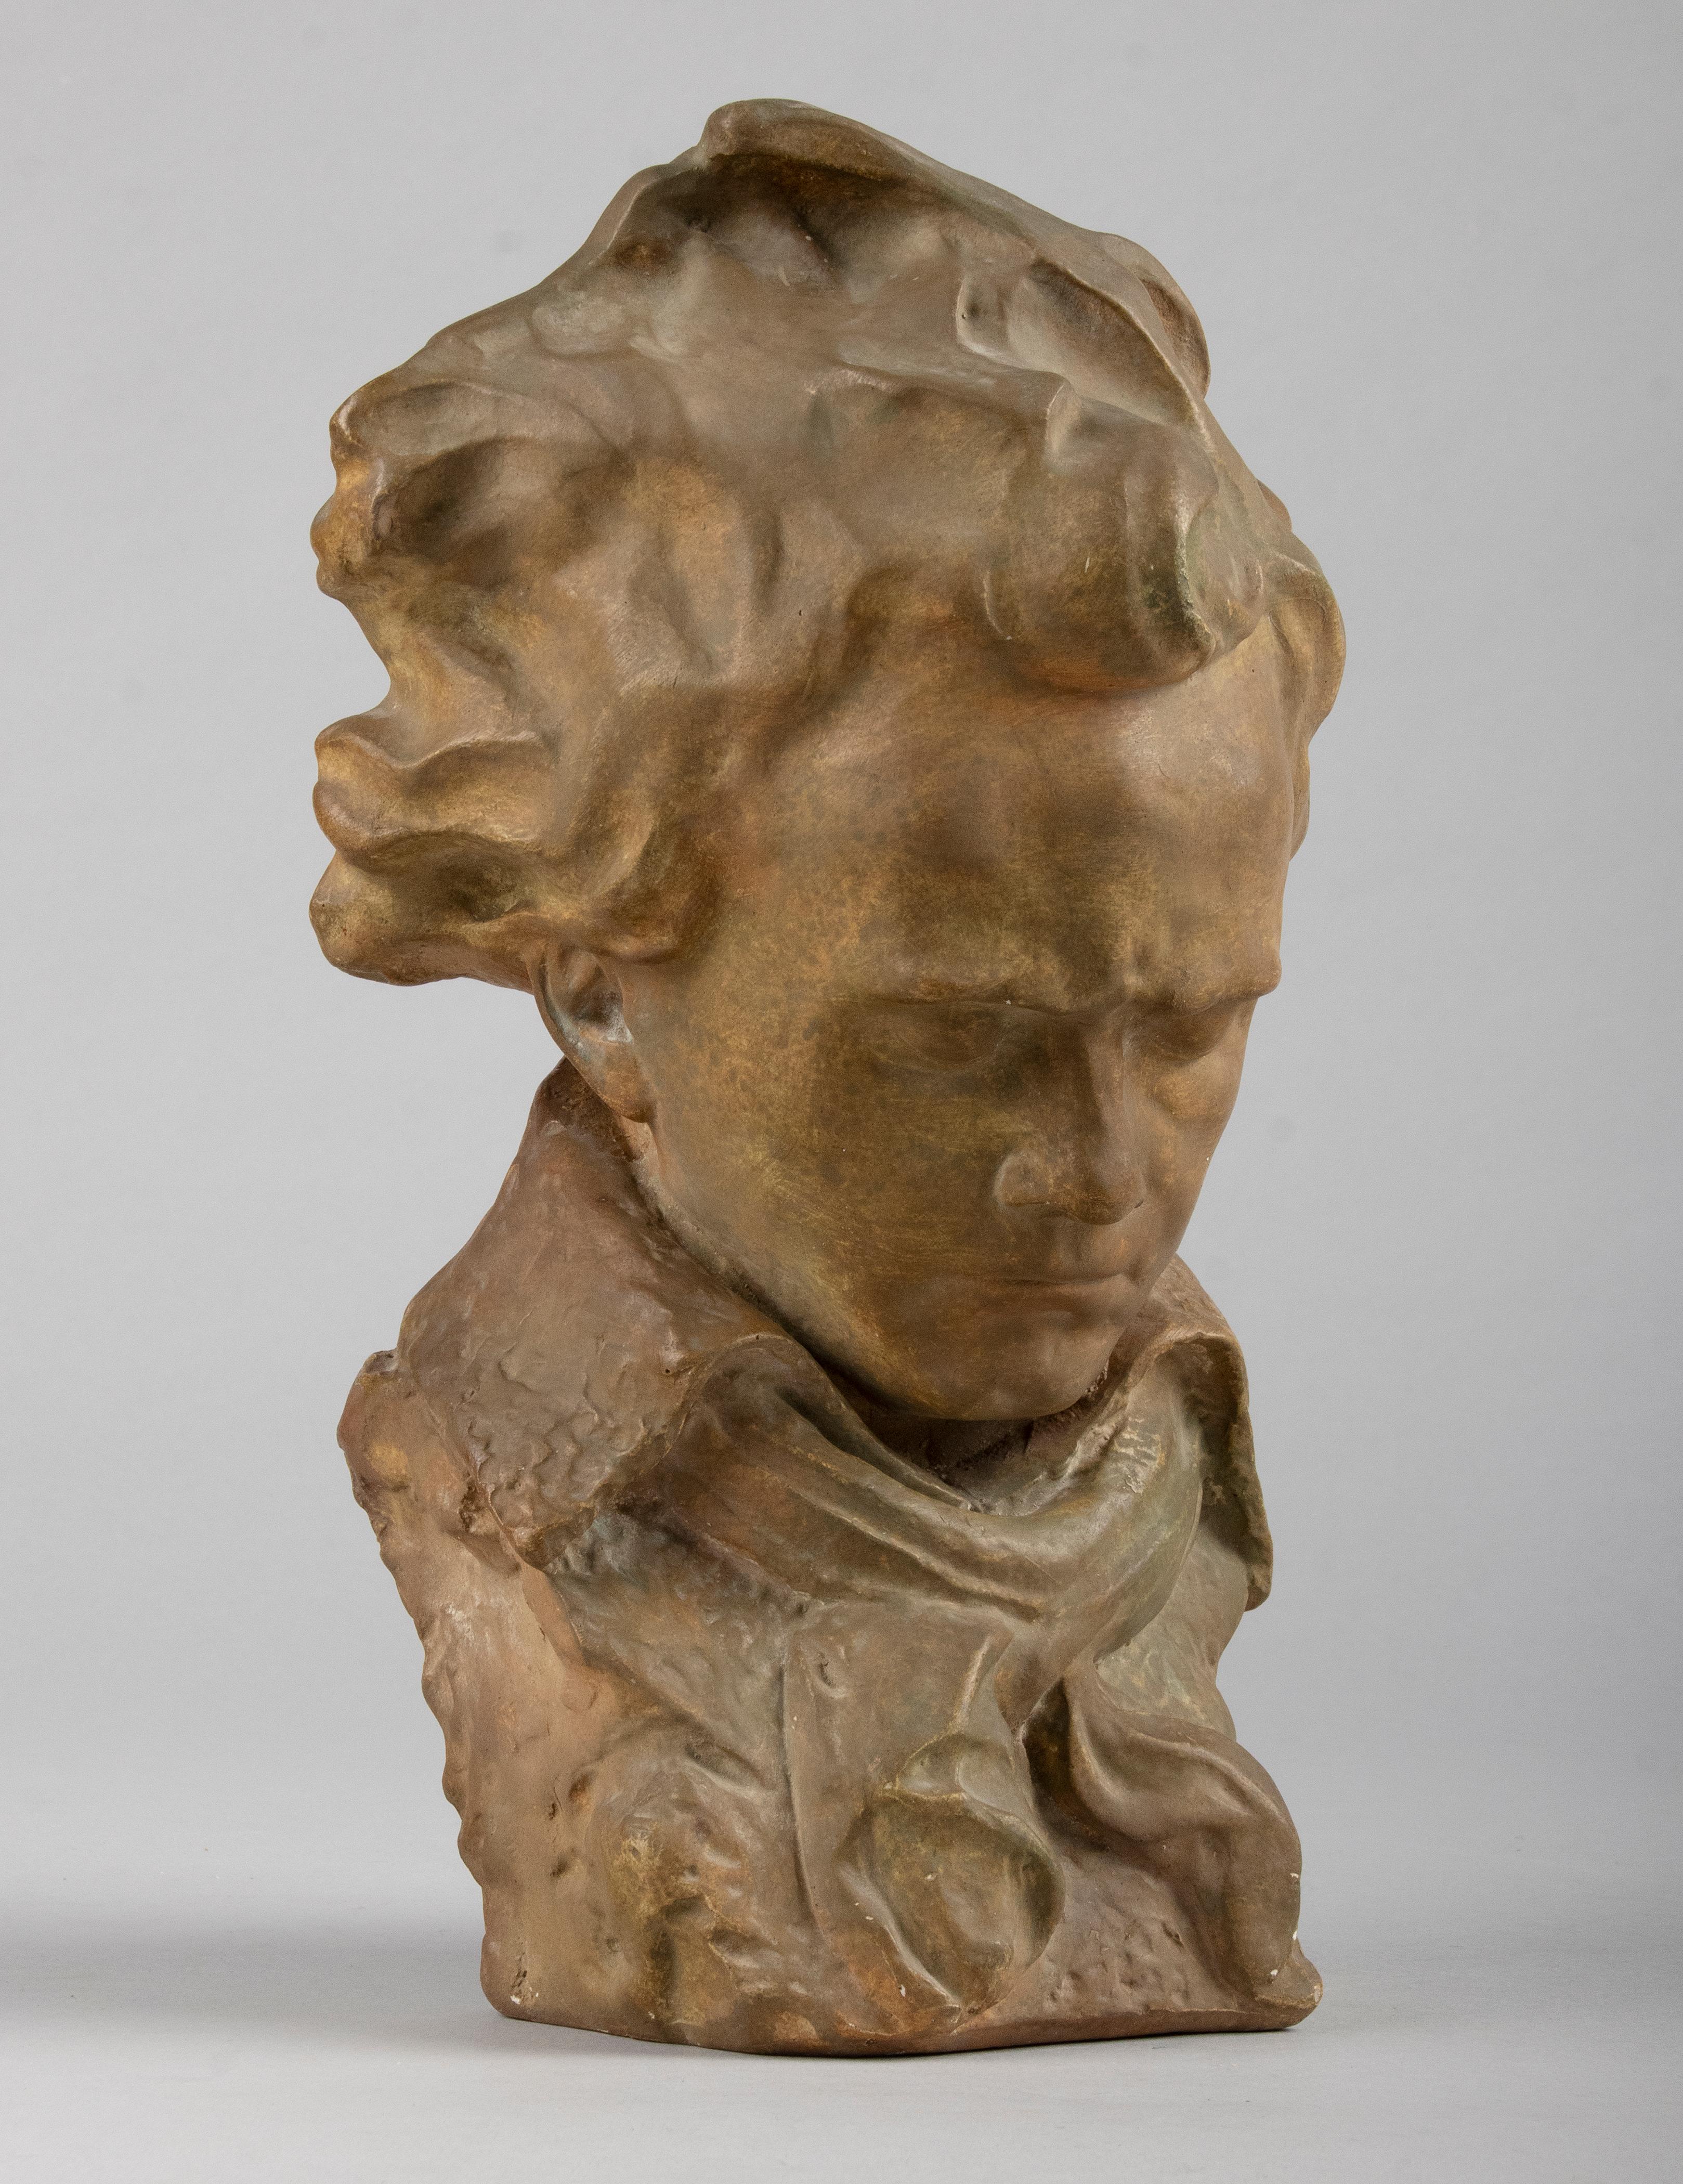 Early 20th century bust of Beethoven. The statue is made of solid plaster, patinated in beautiful terracotta / bronze colors. The sculpture has a beautiful expressive appearance, it is Beethoven with his characteristic gruff, introverted, thoughtful